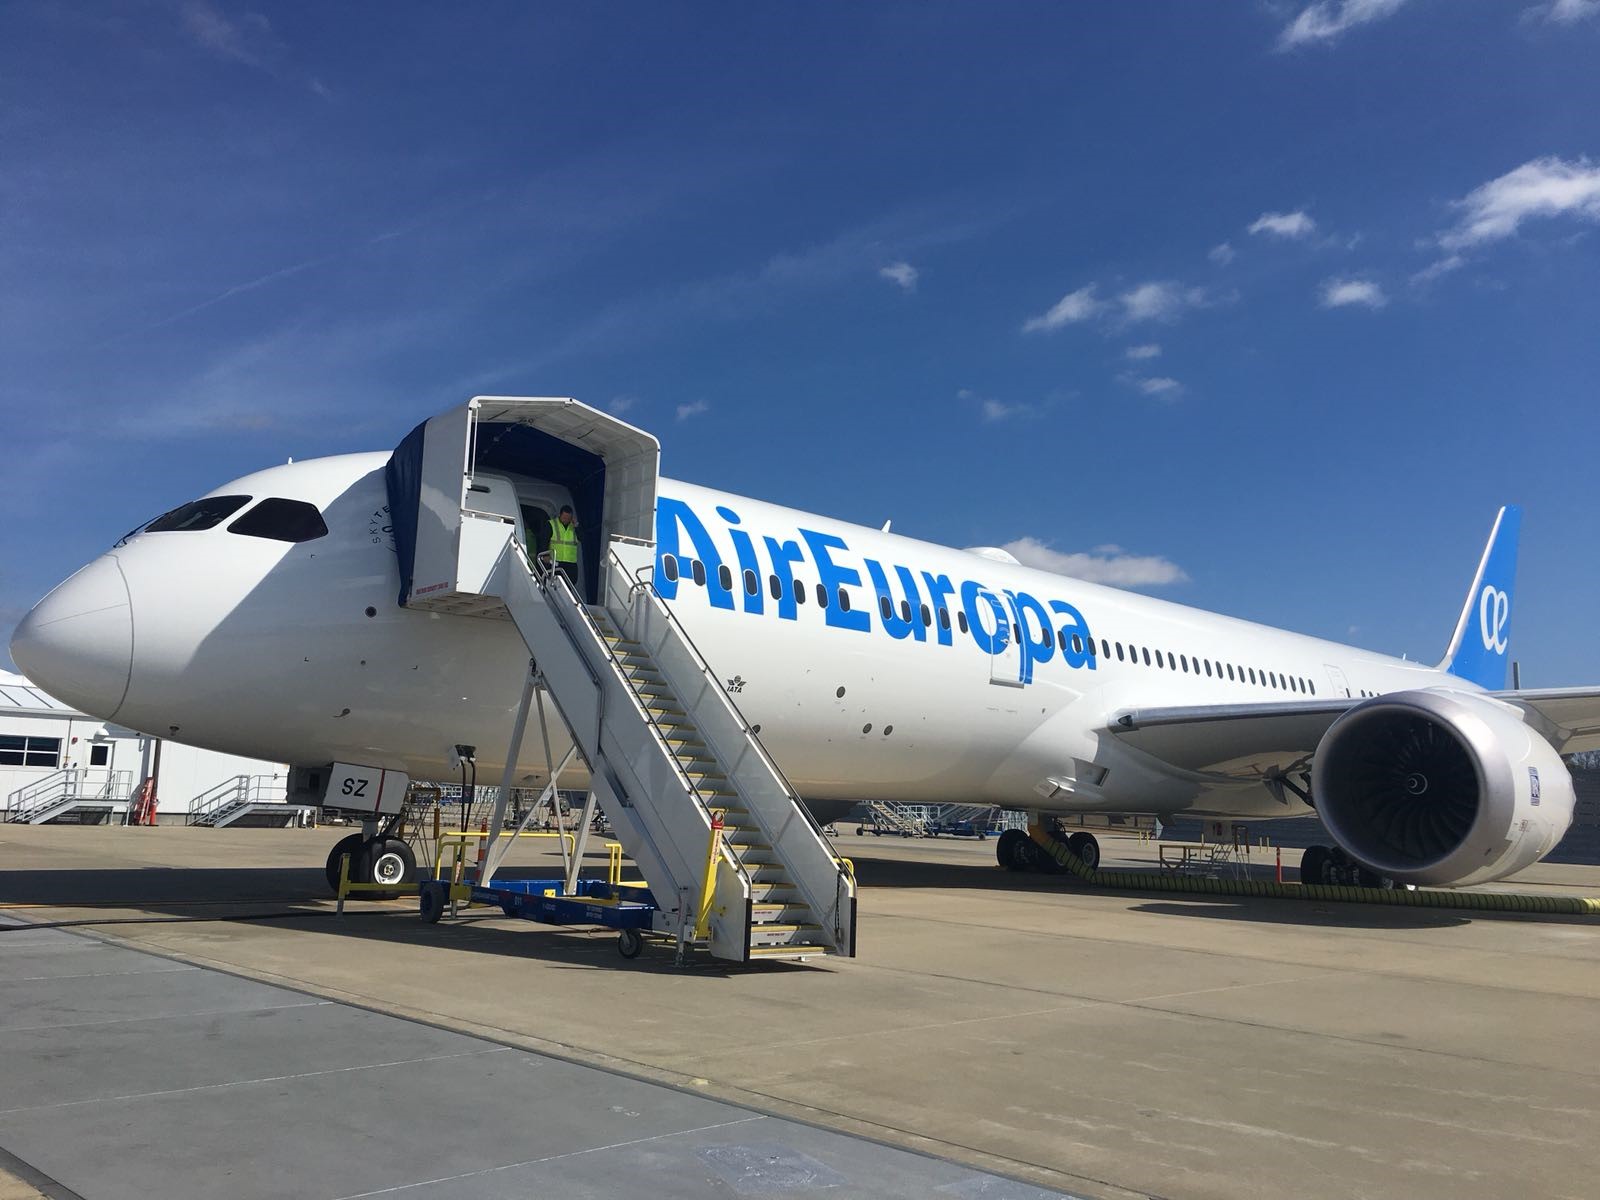 IAG and Globalia confirm discussions to terminate Air Europa’s acquisition